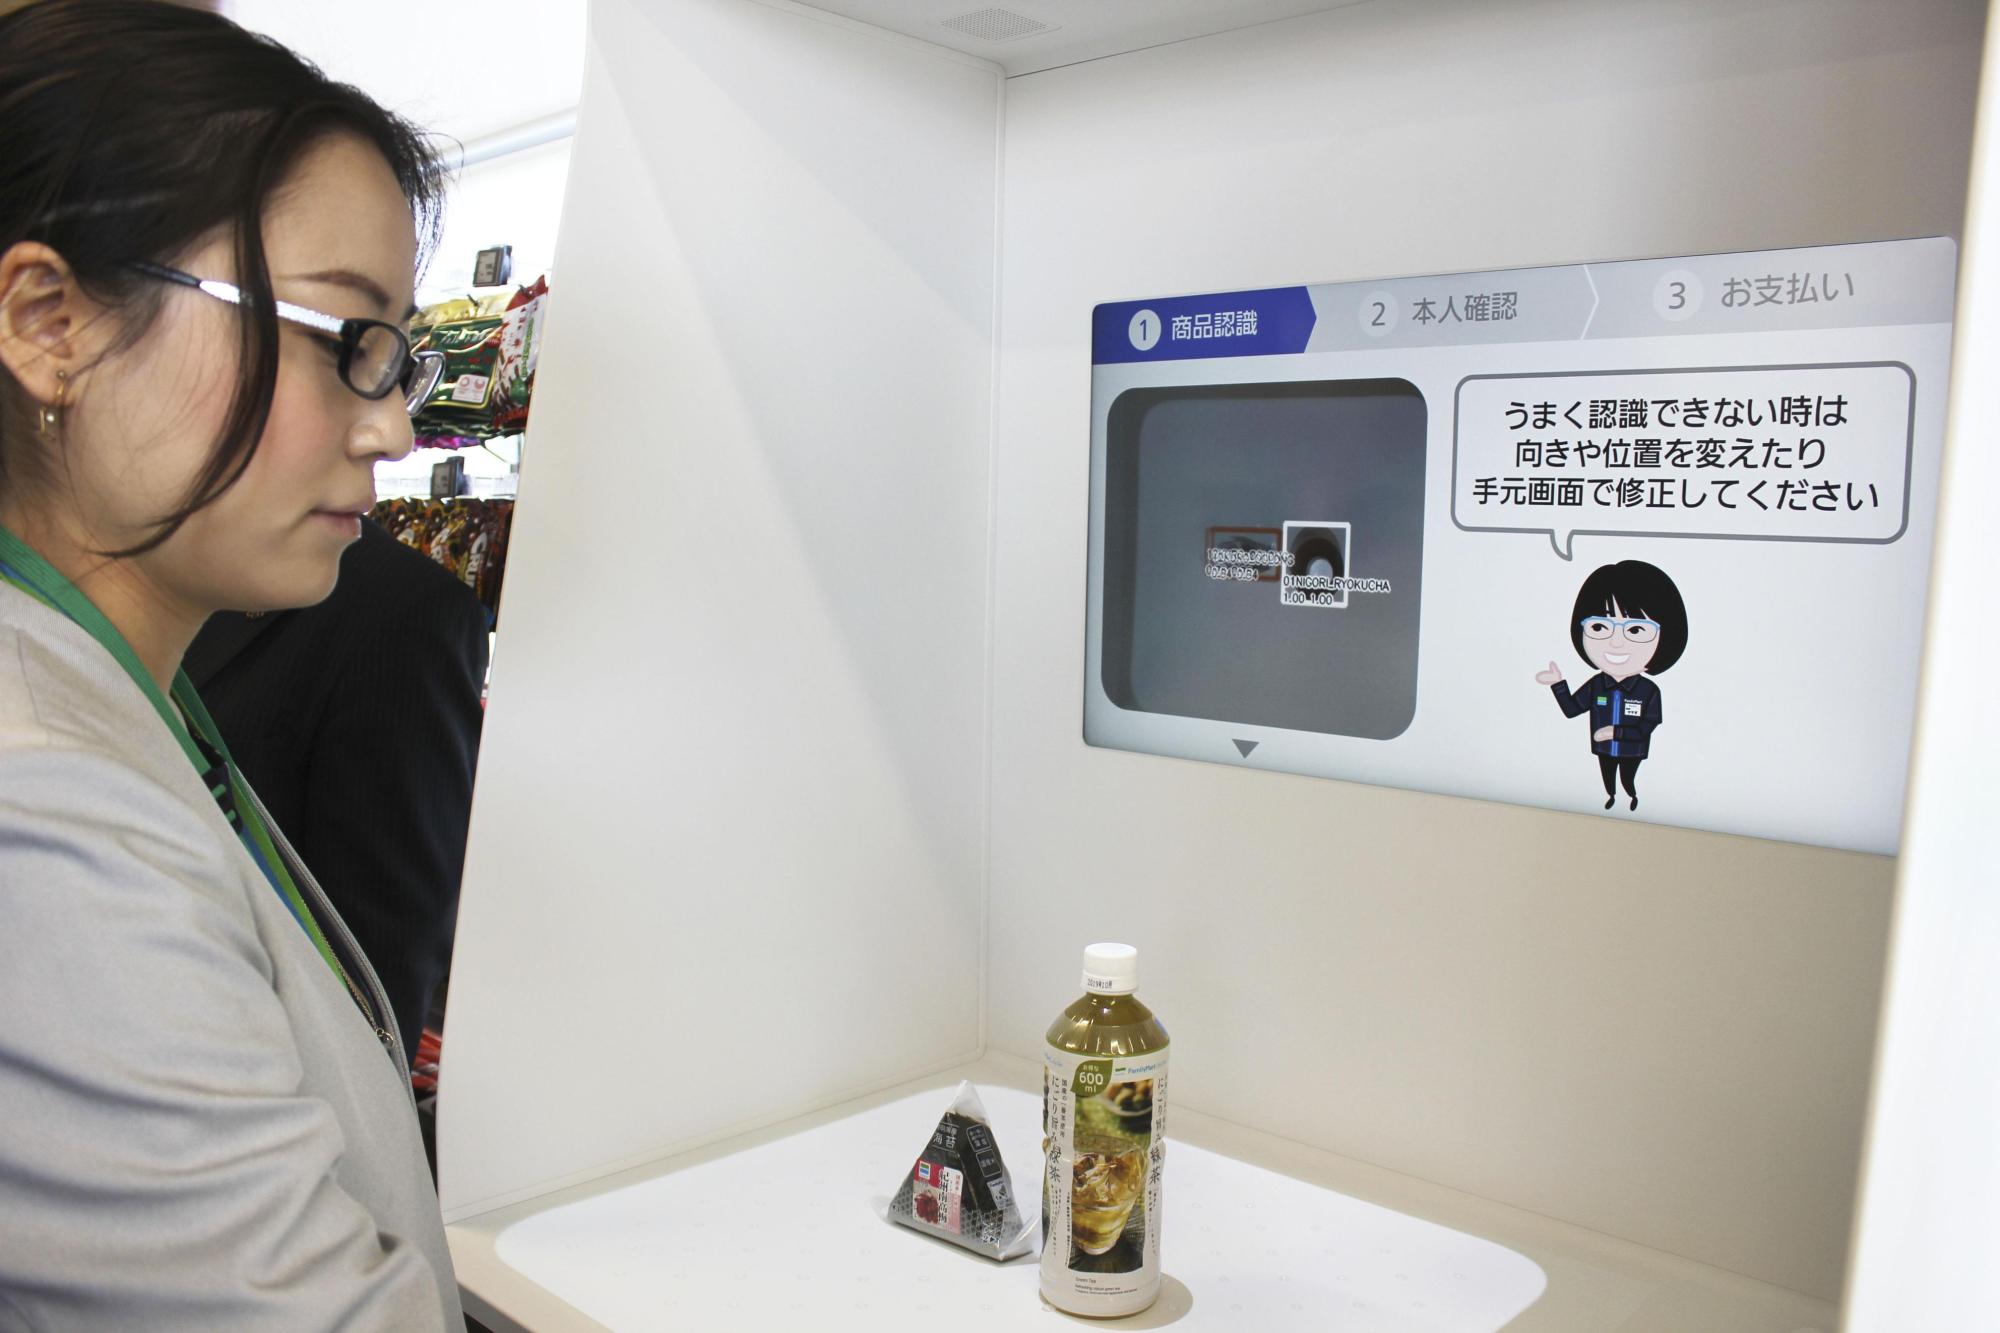 A woman demonstrates a facial recognition cashier system at a FamilyMart store in Yokohama on Tuesday. | KYODO